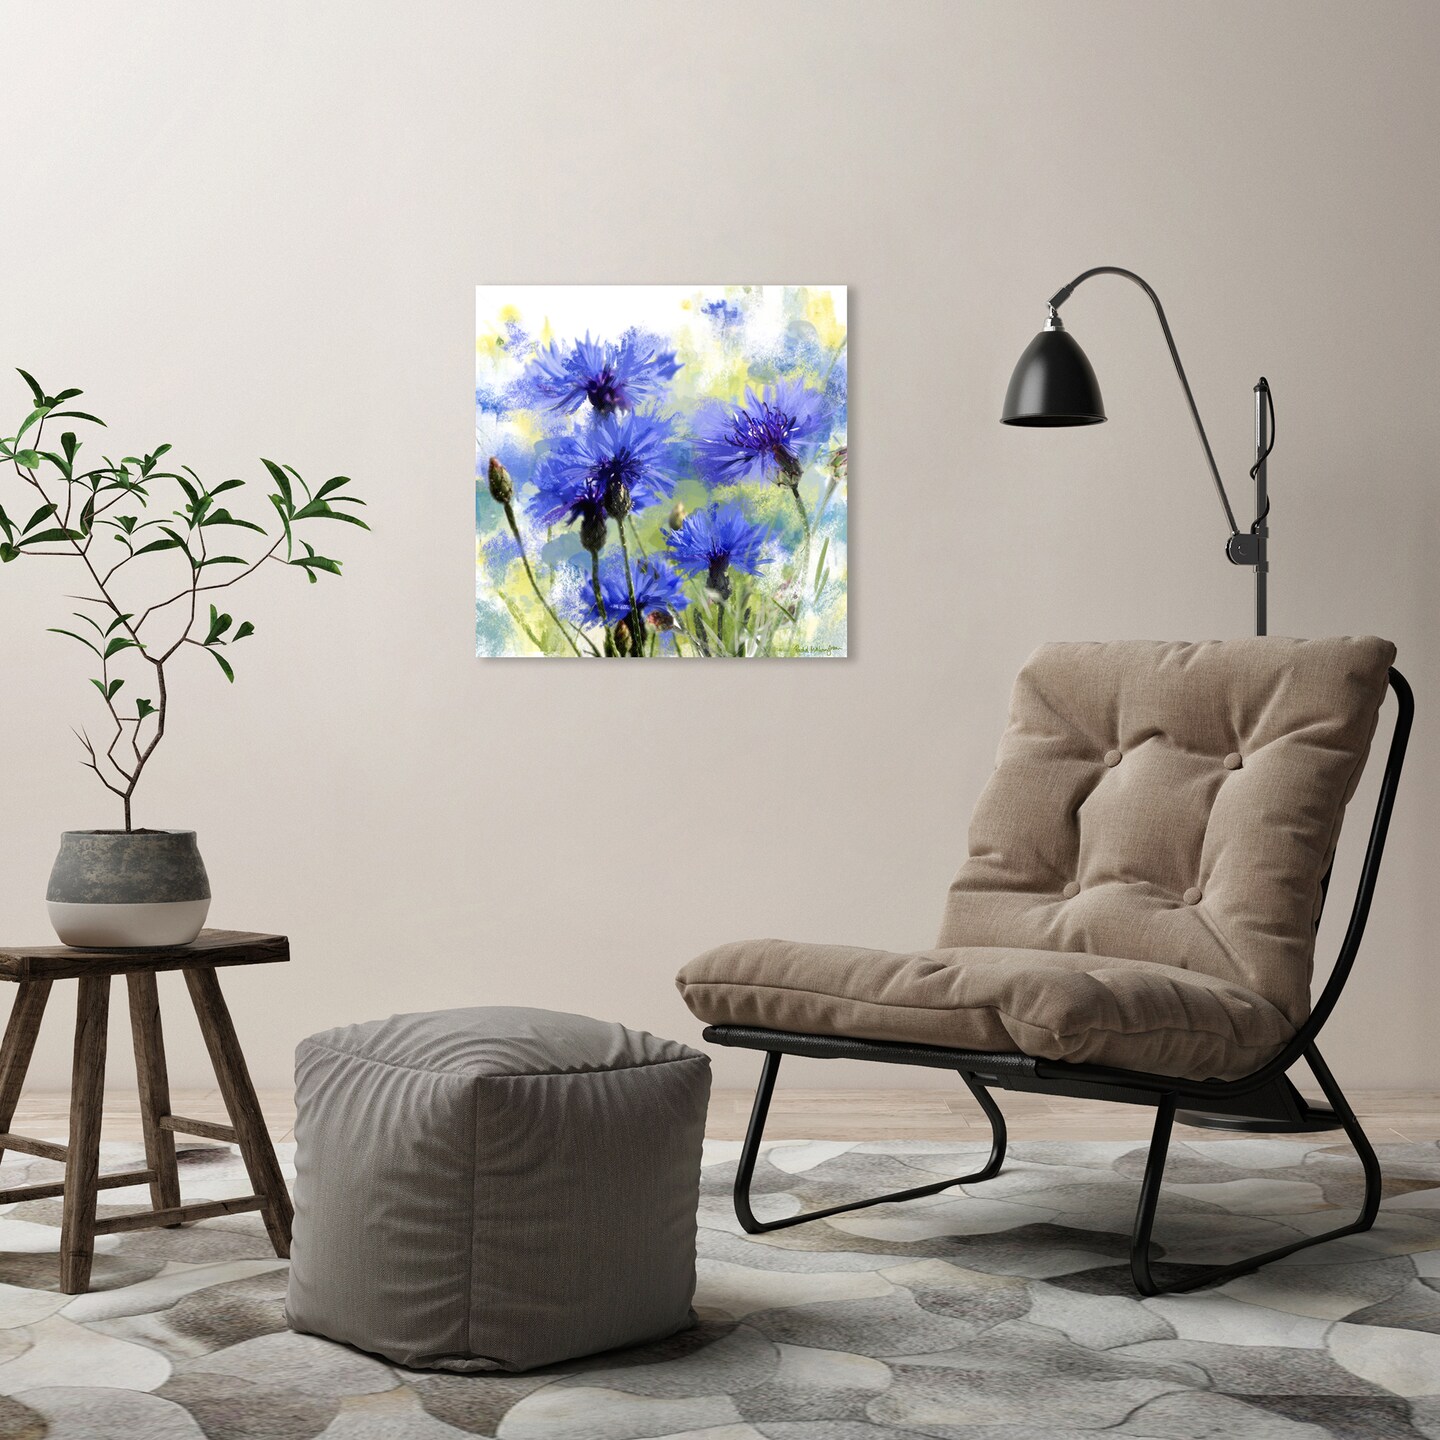 Cornflowers by Rachel McNaughton 10x10 Gallery Wrapped Canvas - Americanflat